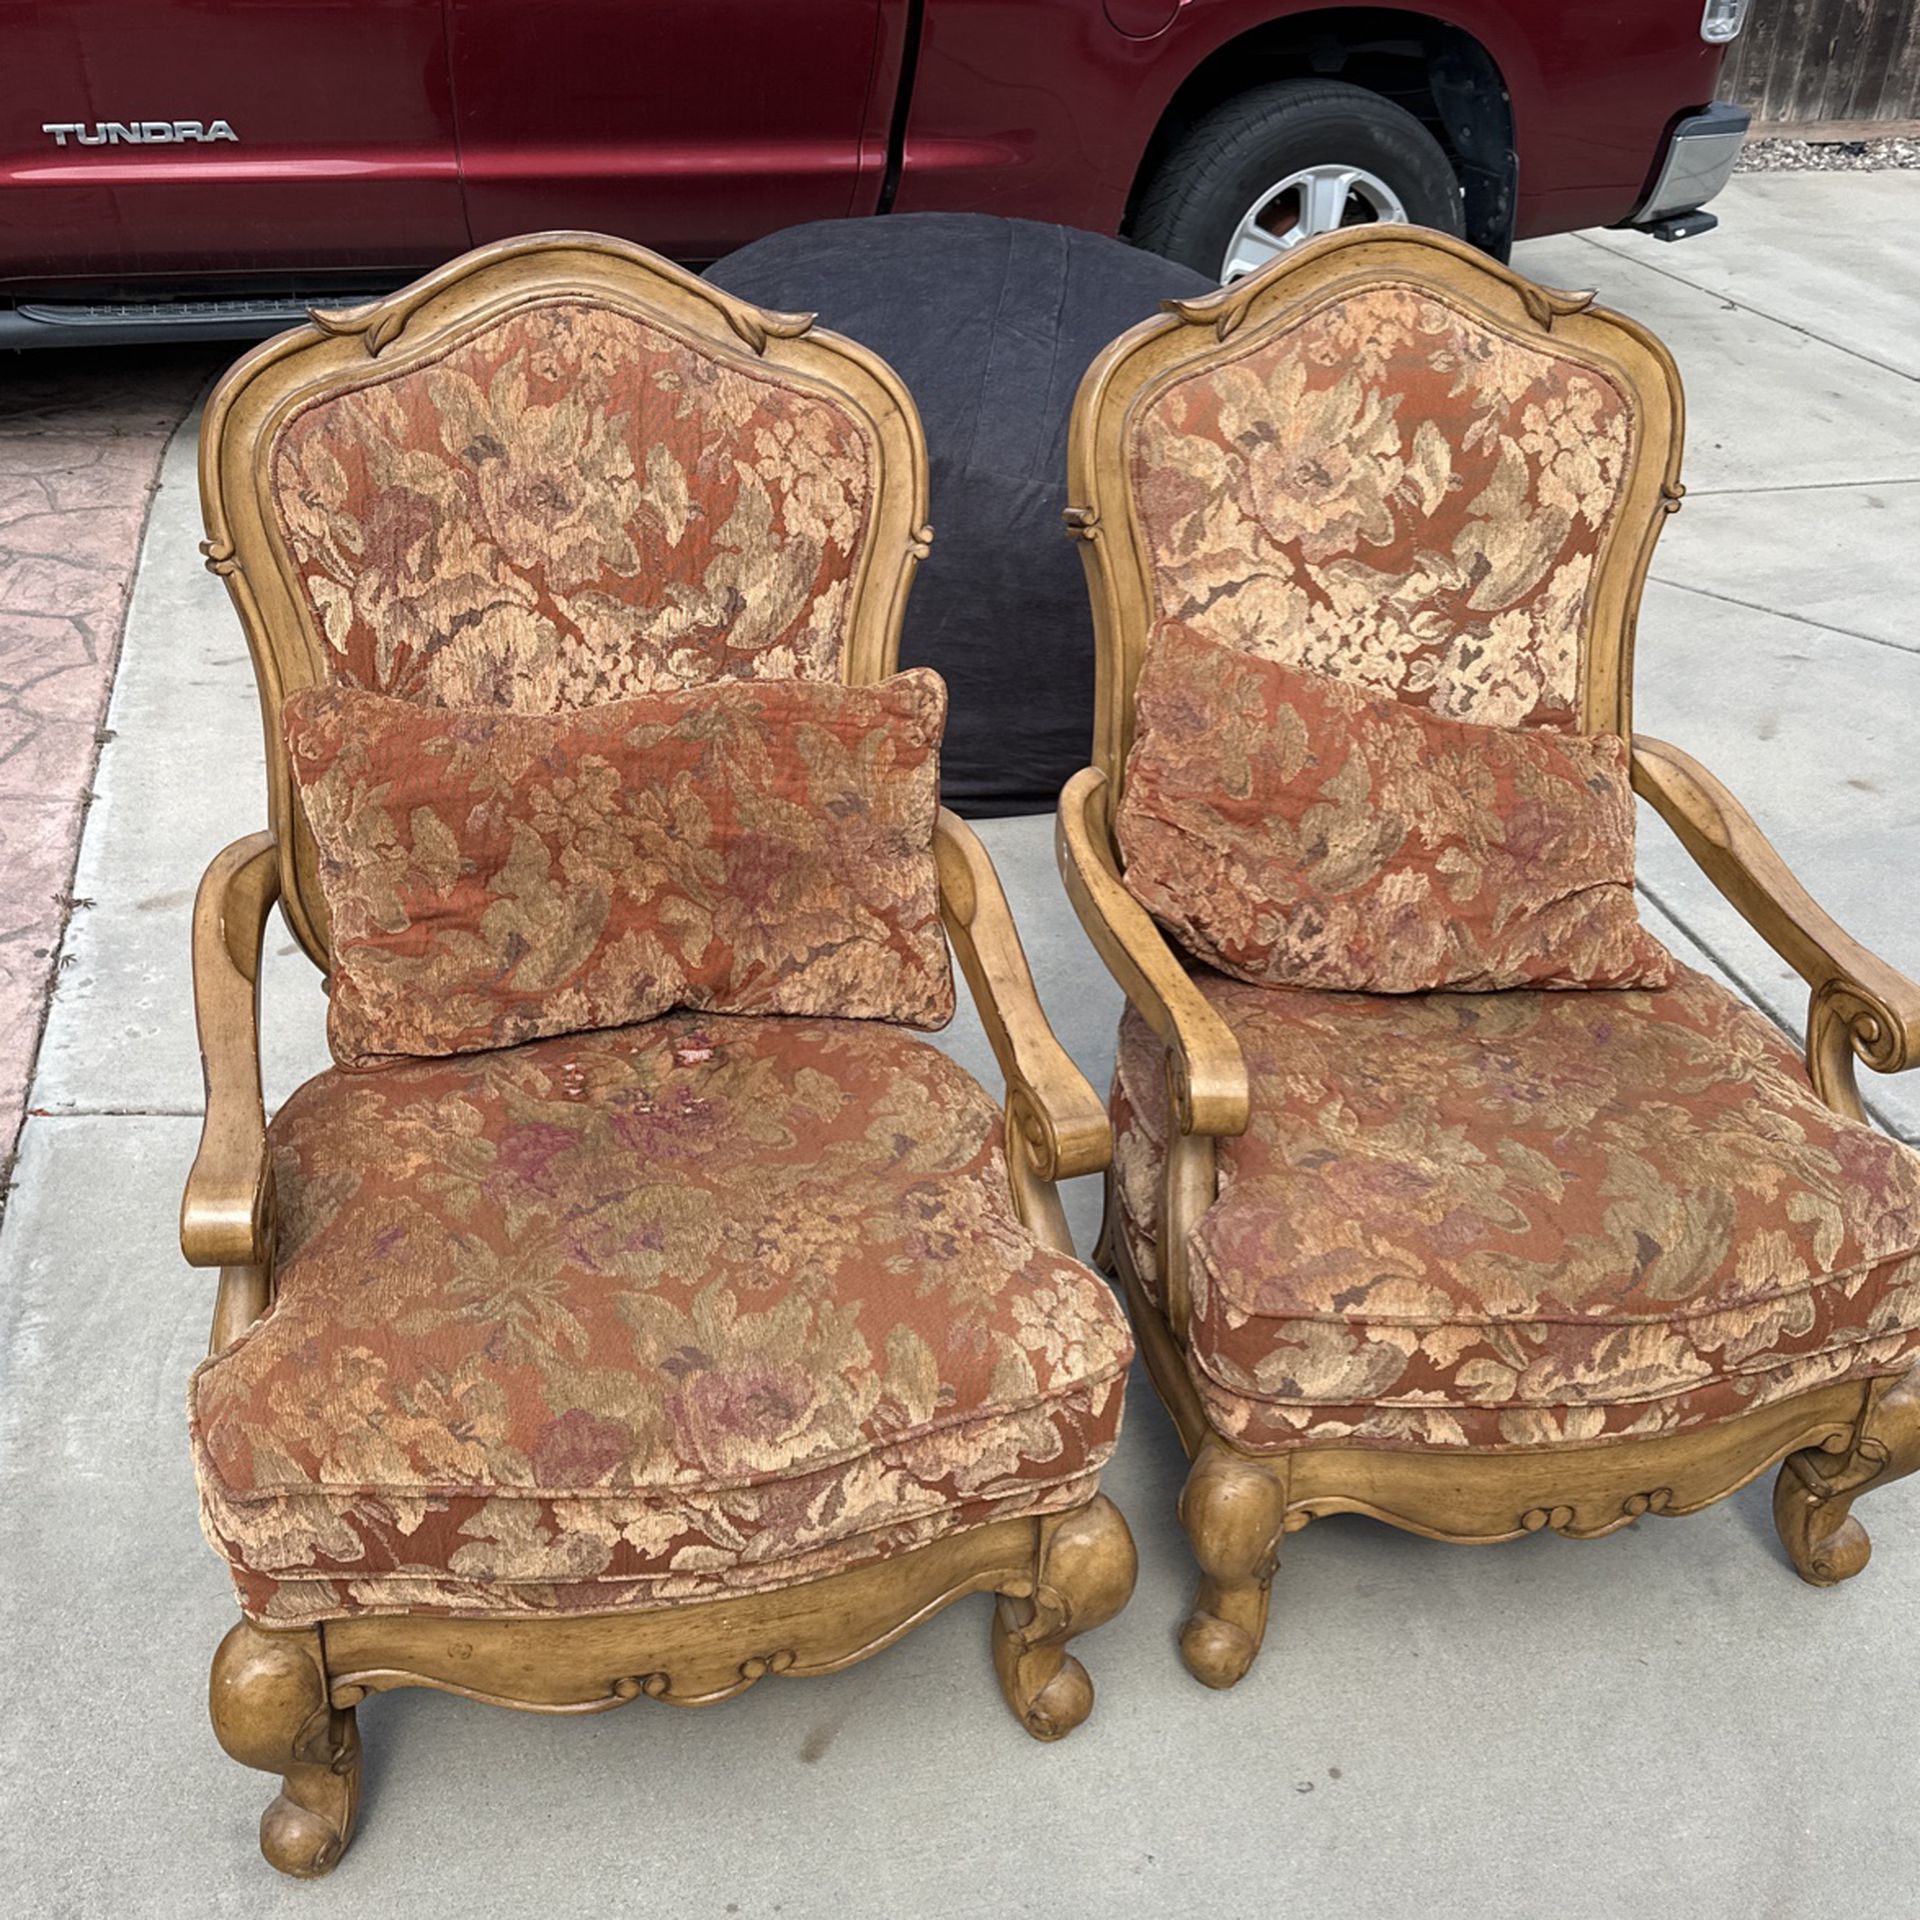 FREE MATCHING Chairs Used AS IS 